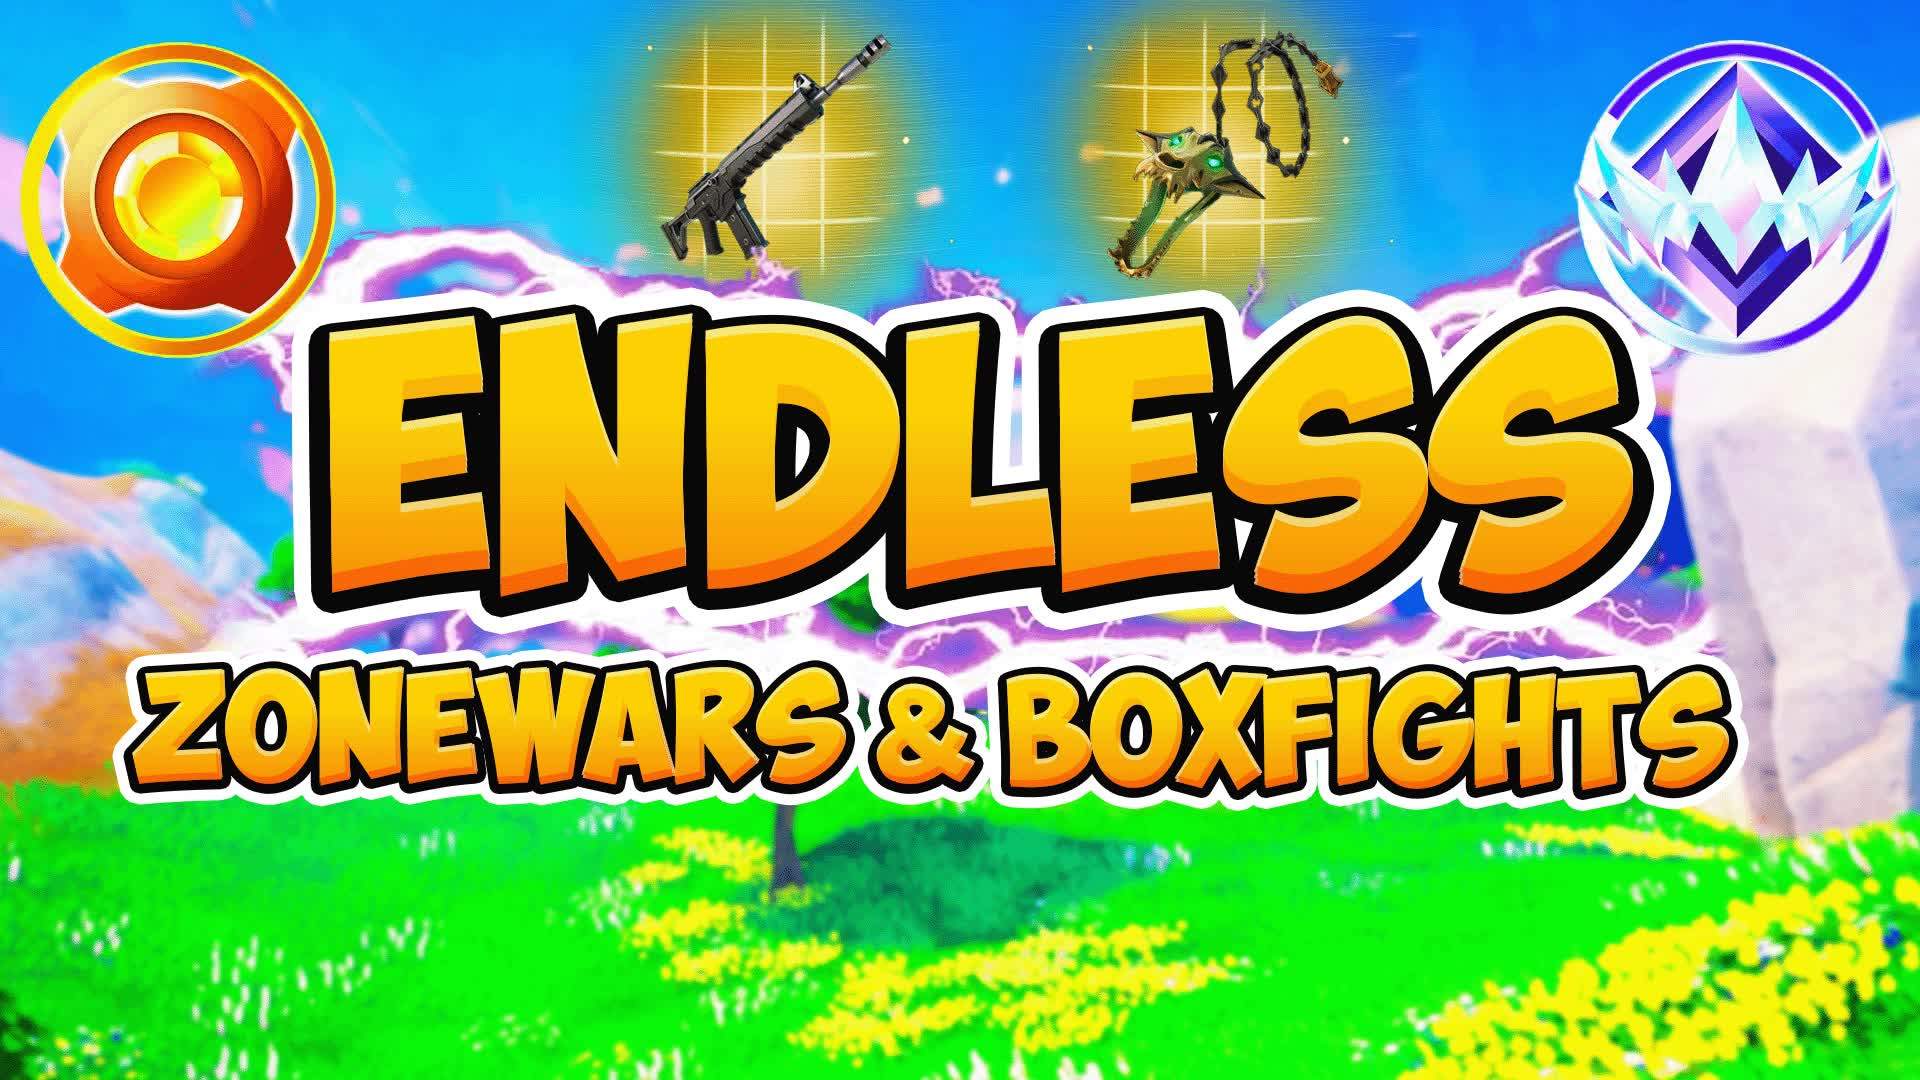 ENDLESS ZONE WARS & BOX FIGHTS